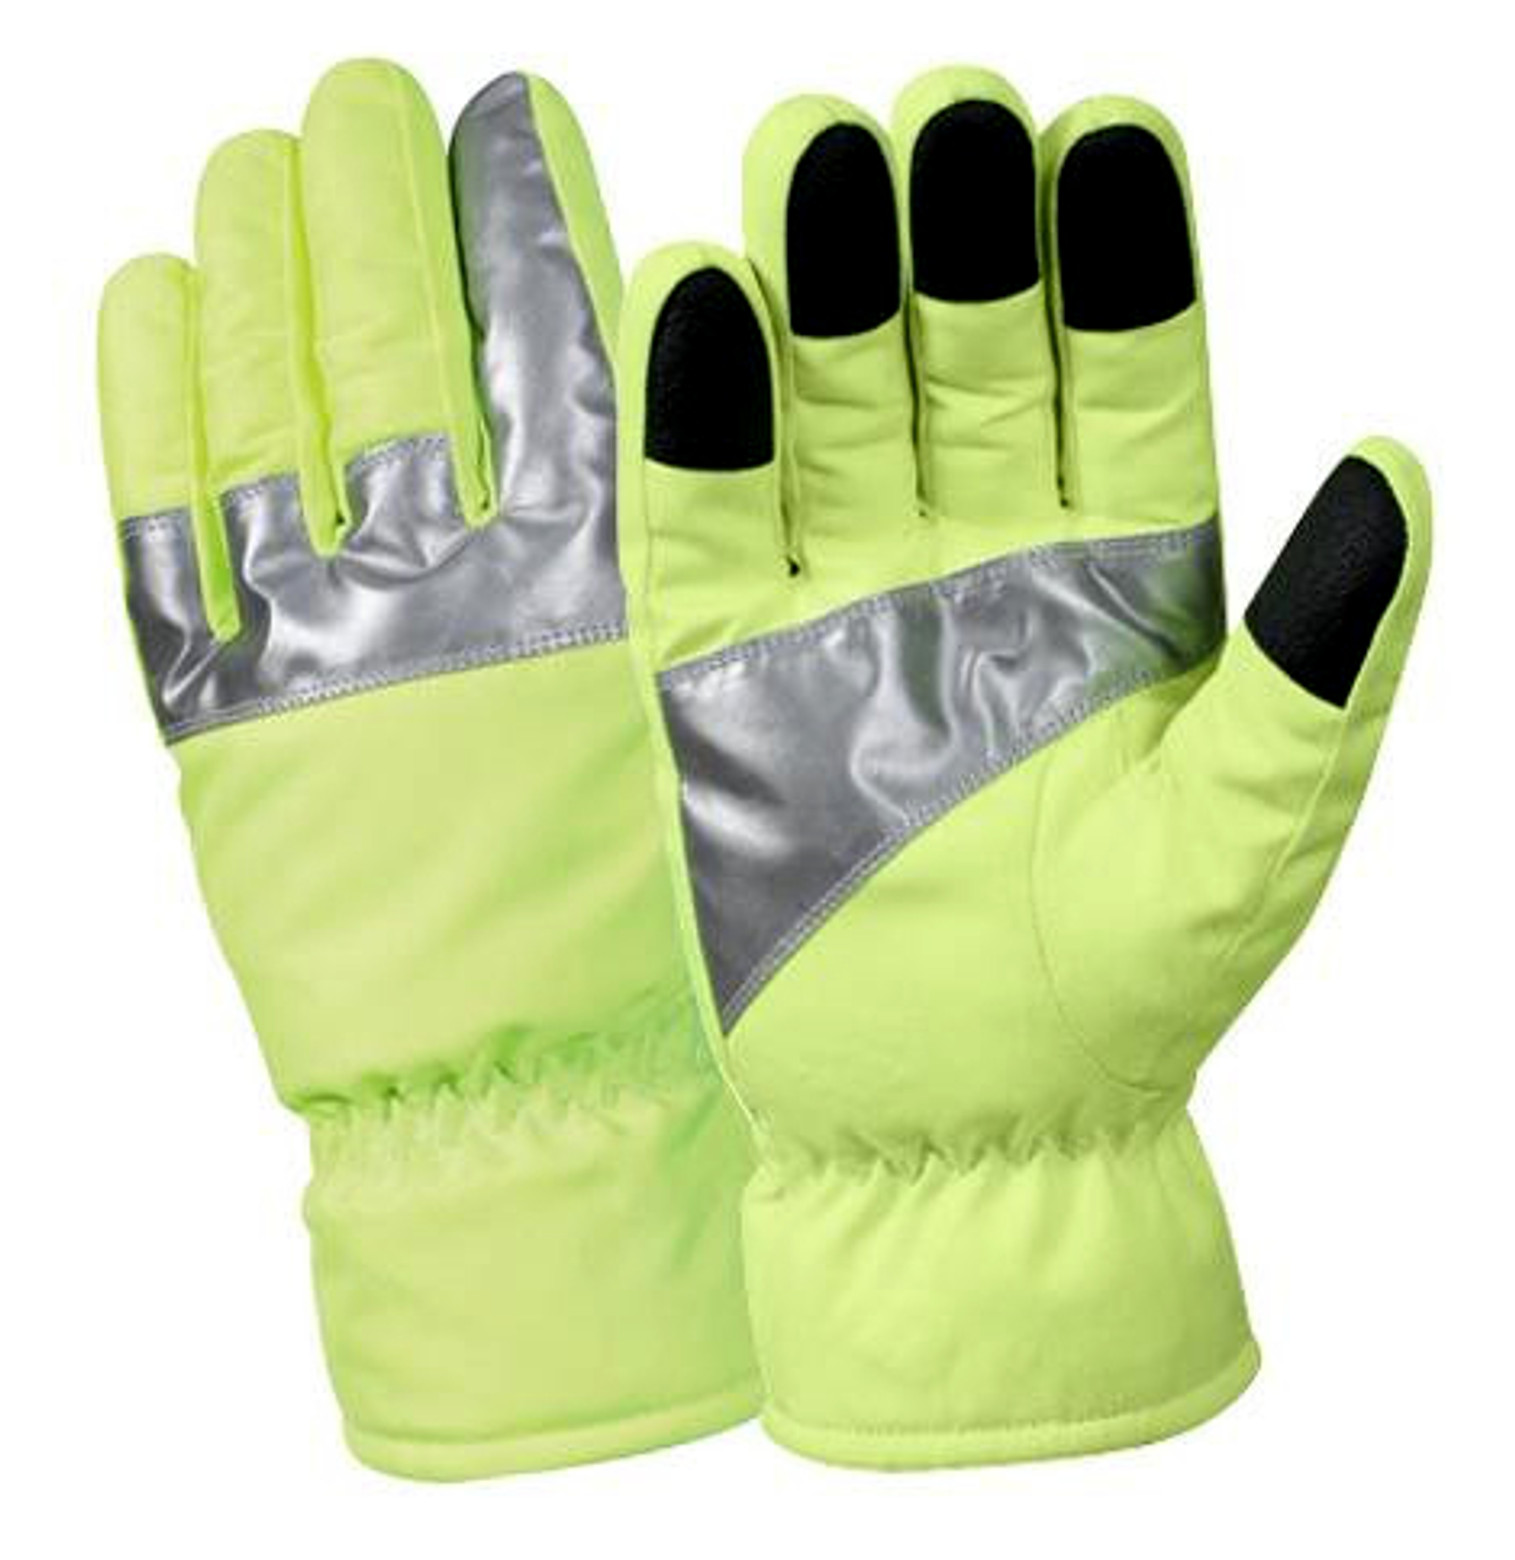 Rothco Safety Green Gloves With Reflective Tape